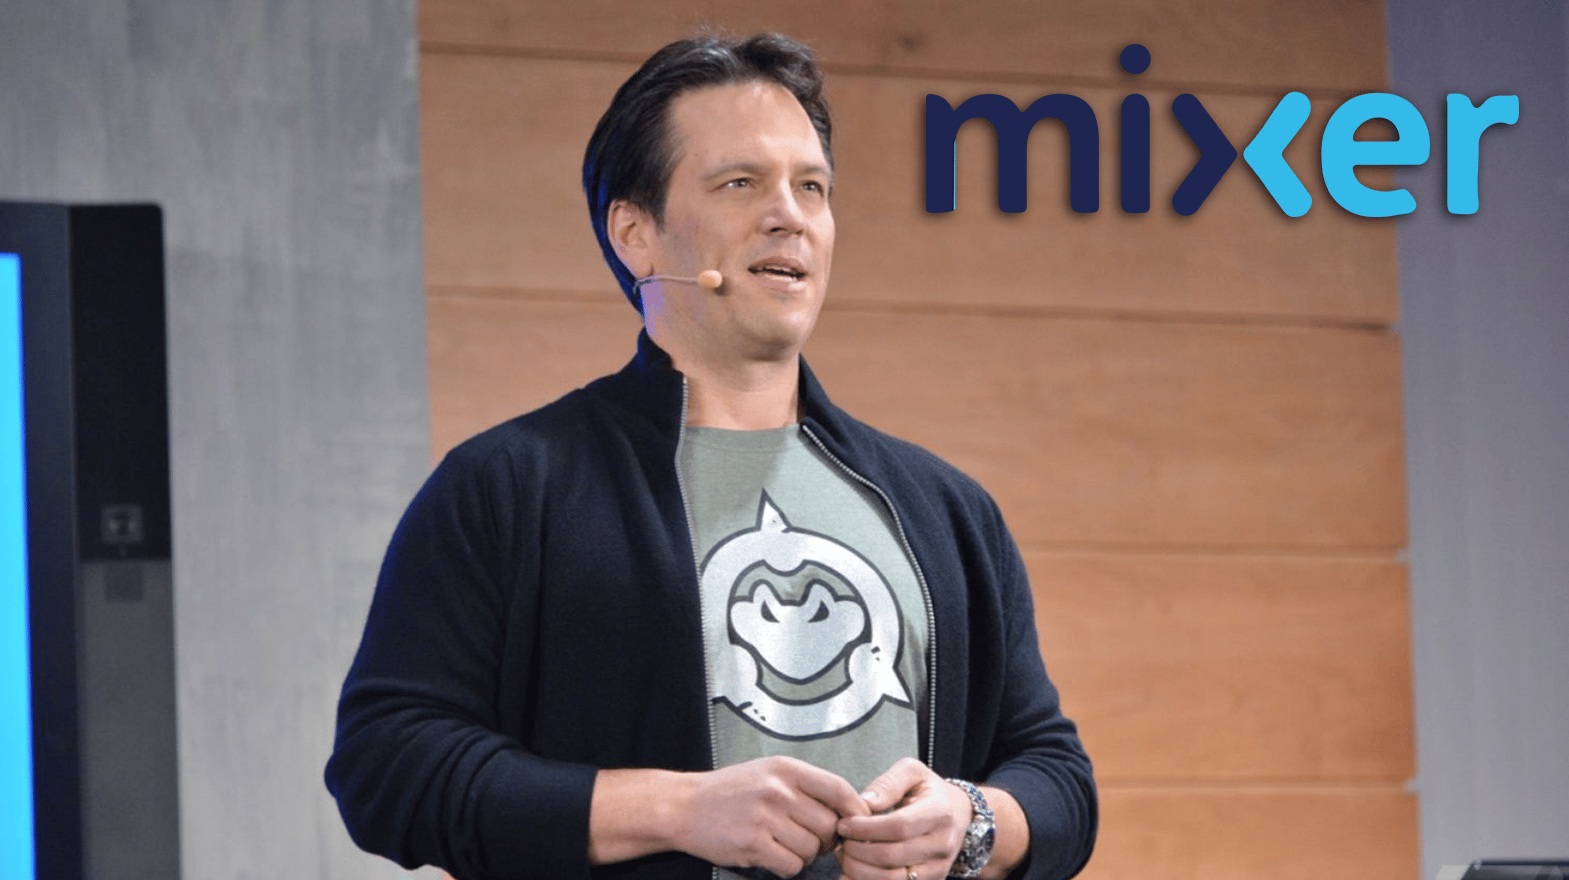 Phil Spencer keynote with mixer logo